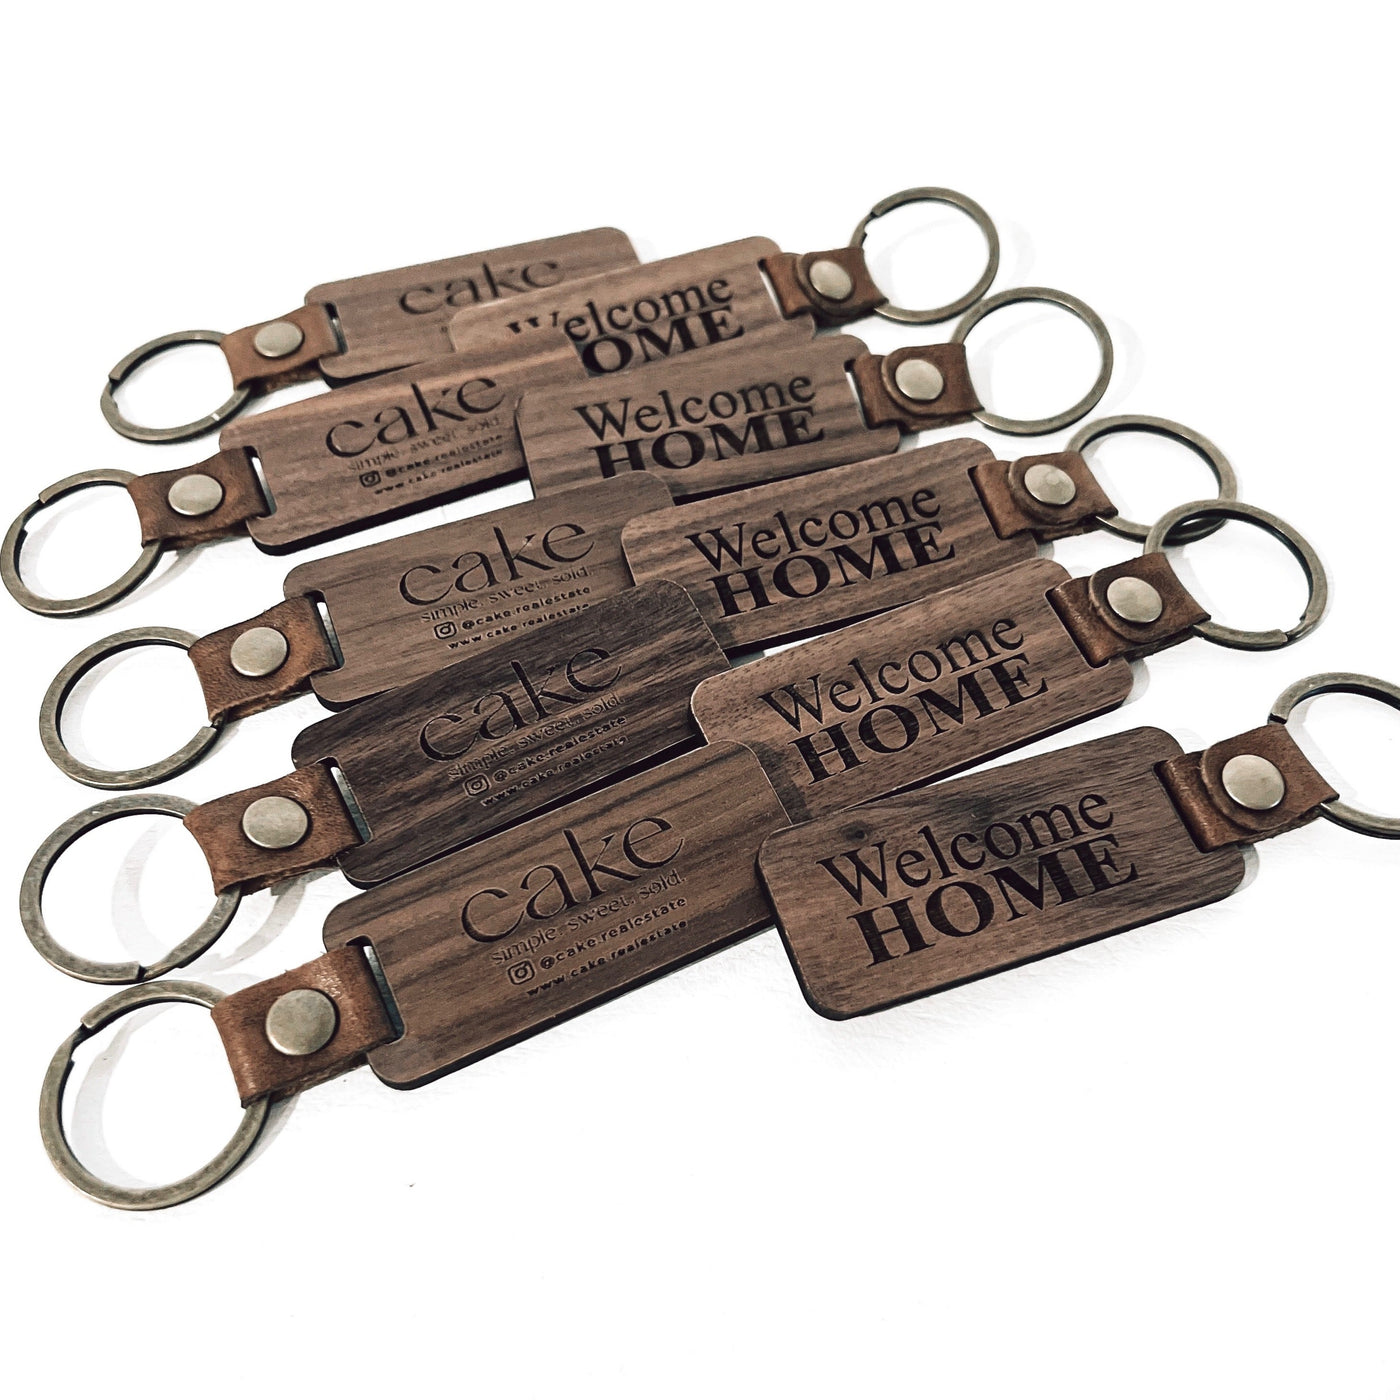 Customize Solutions - *Deal of the week* Buy 2 wooden customize keychain  and get 1 free Limited offer till next Monday For order inbox us or  whatsapp @03345245651 Thanku :)